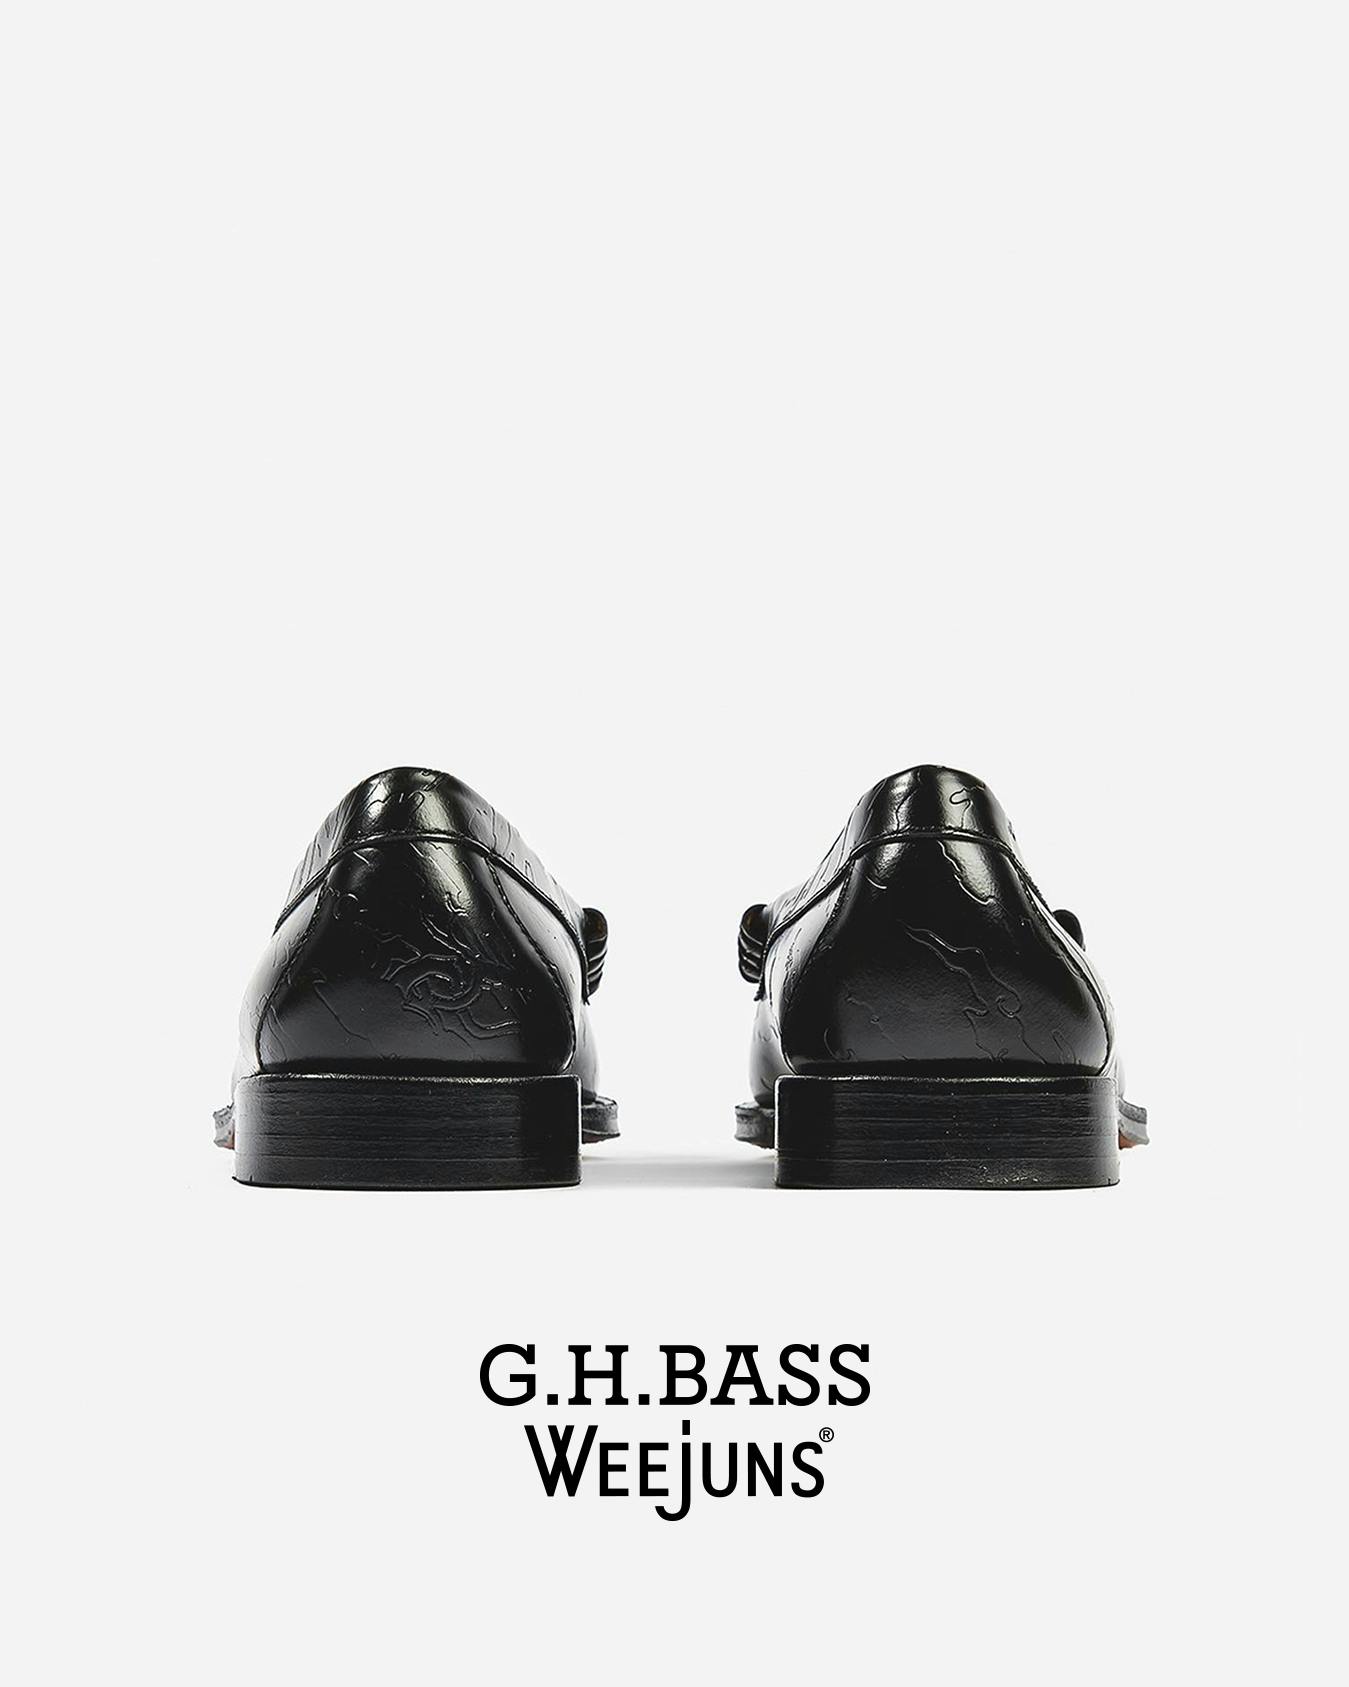 G.H.BASS - Logotype with DoThings